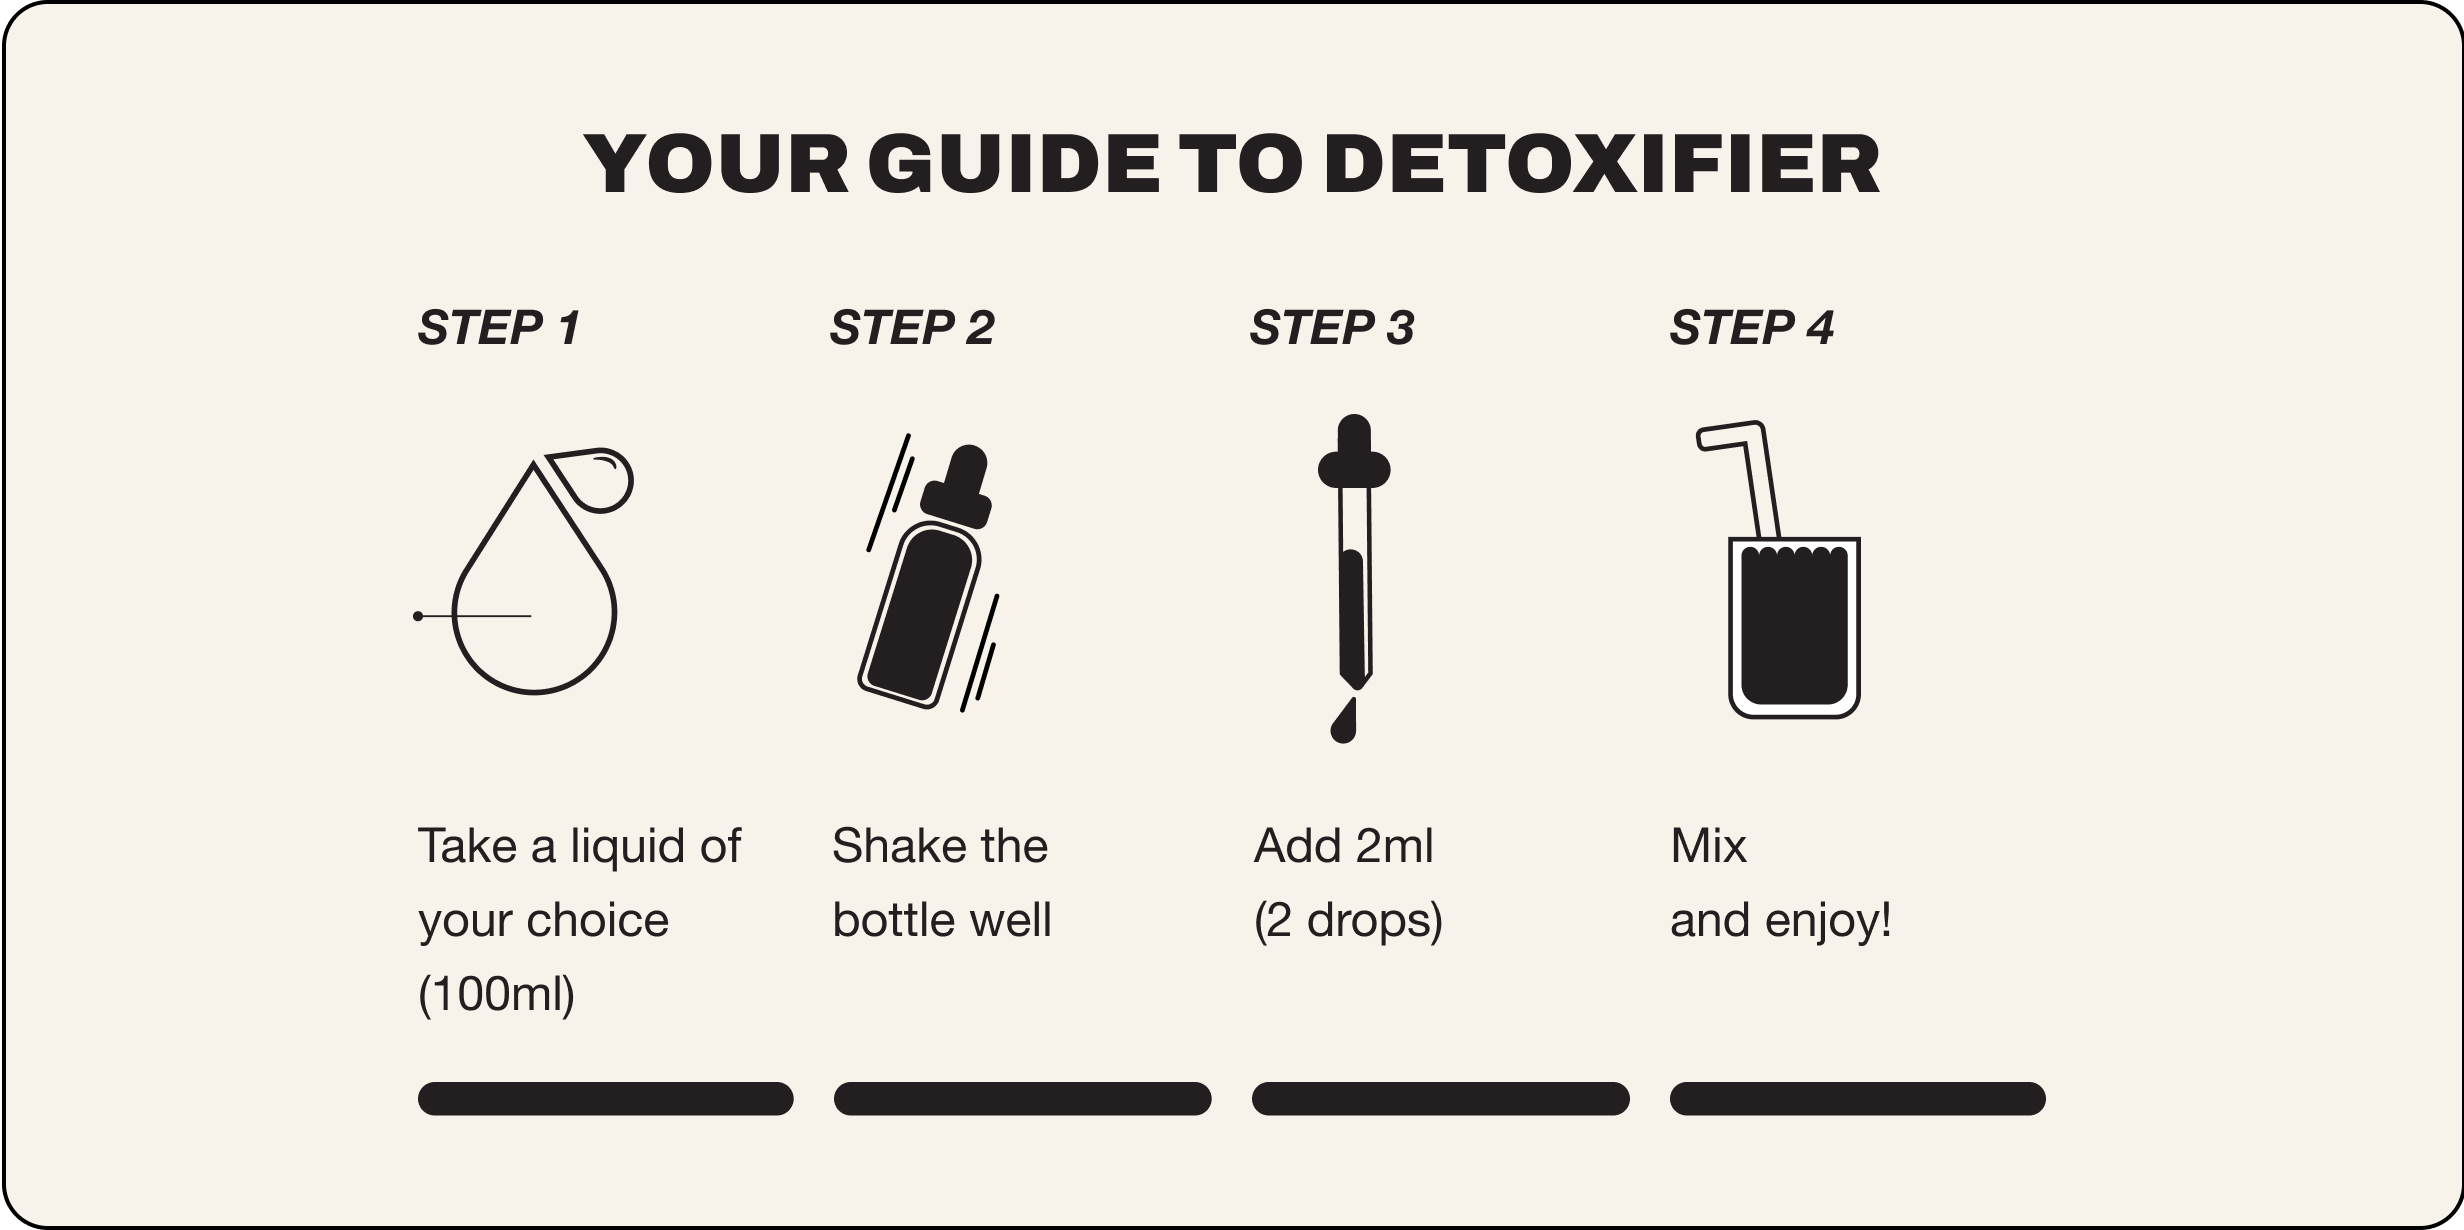 Your guide to Detoxifier. Step 1 take a liquid of your choice 100ml, step 2 shake the bottle well, step 3 add 2ml (2 drops), step 4 mix and enjoy!